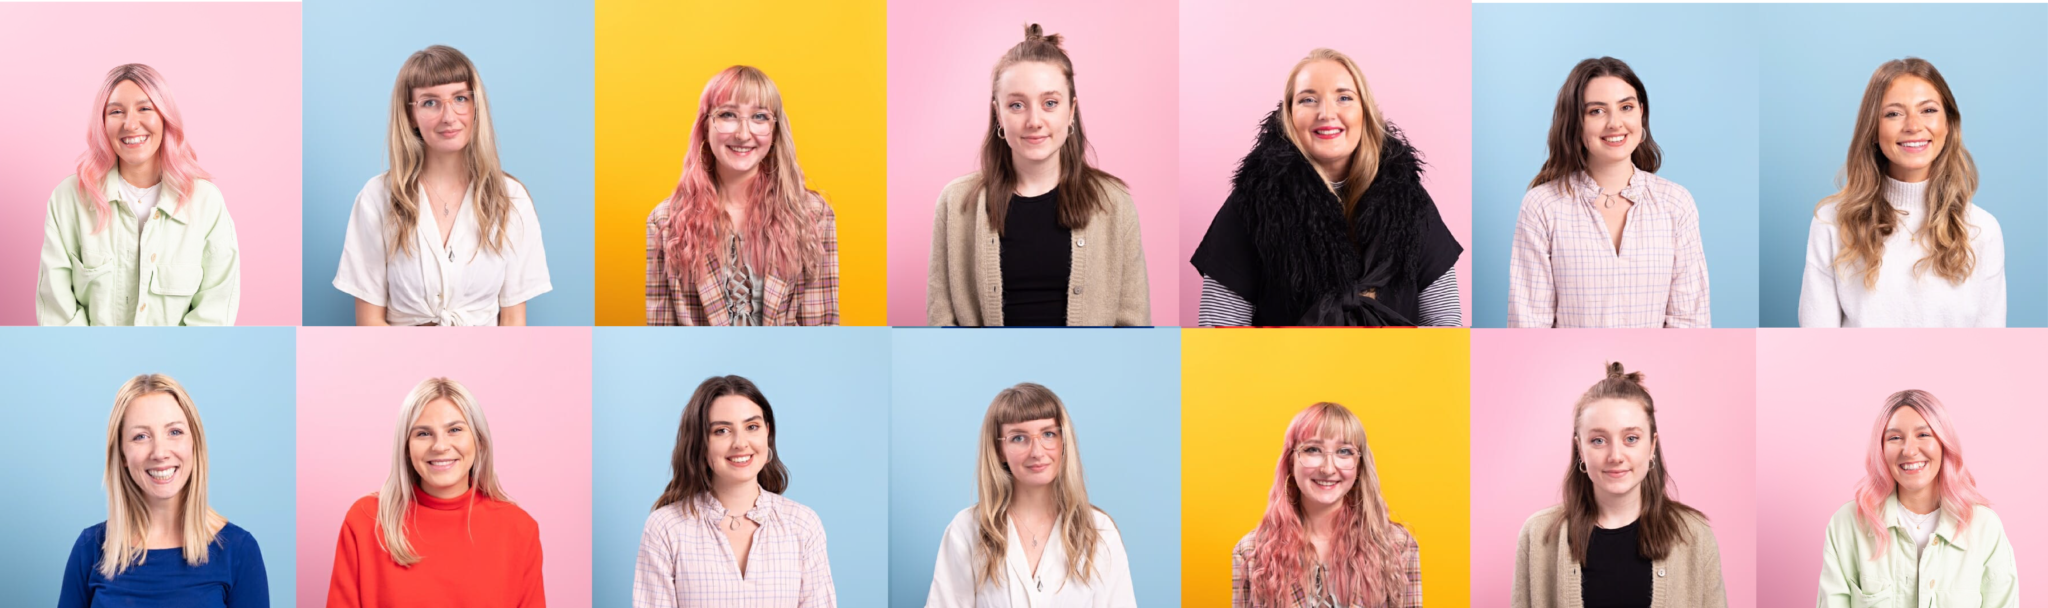 Introducing the Wonderful Women of Brilliant Agency